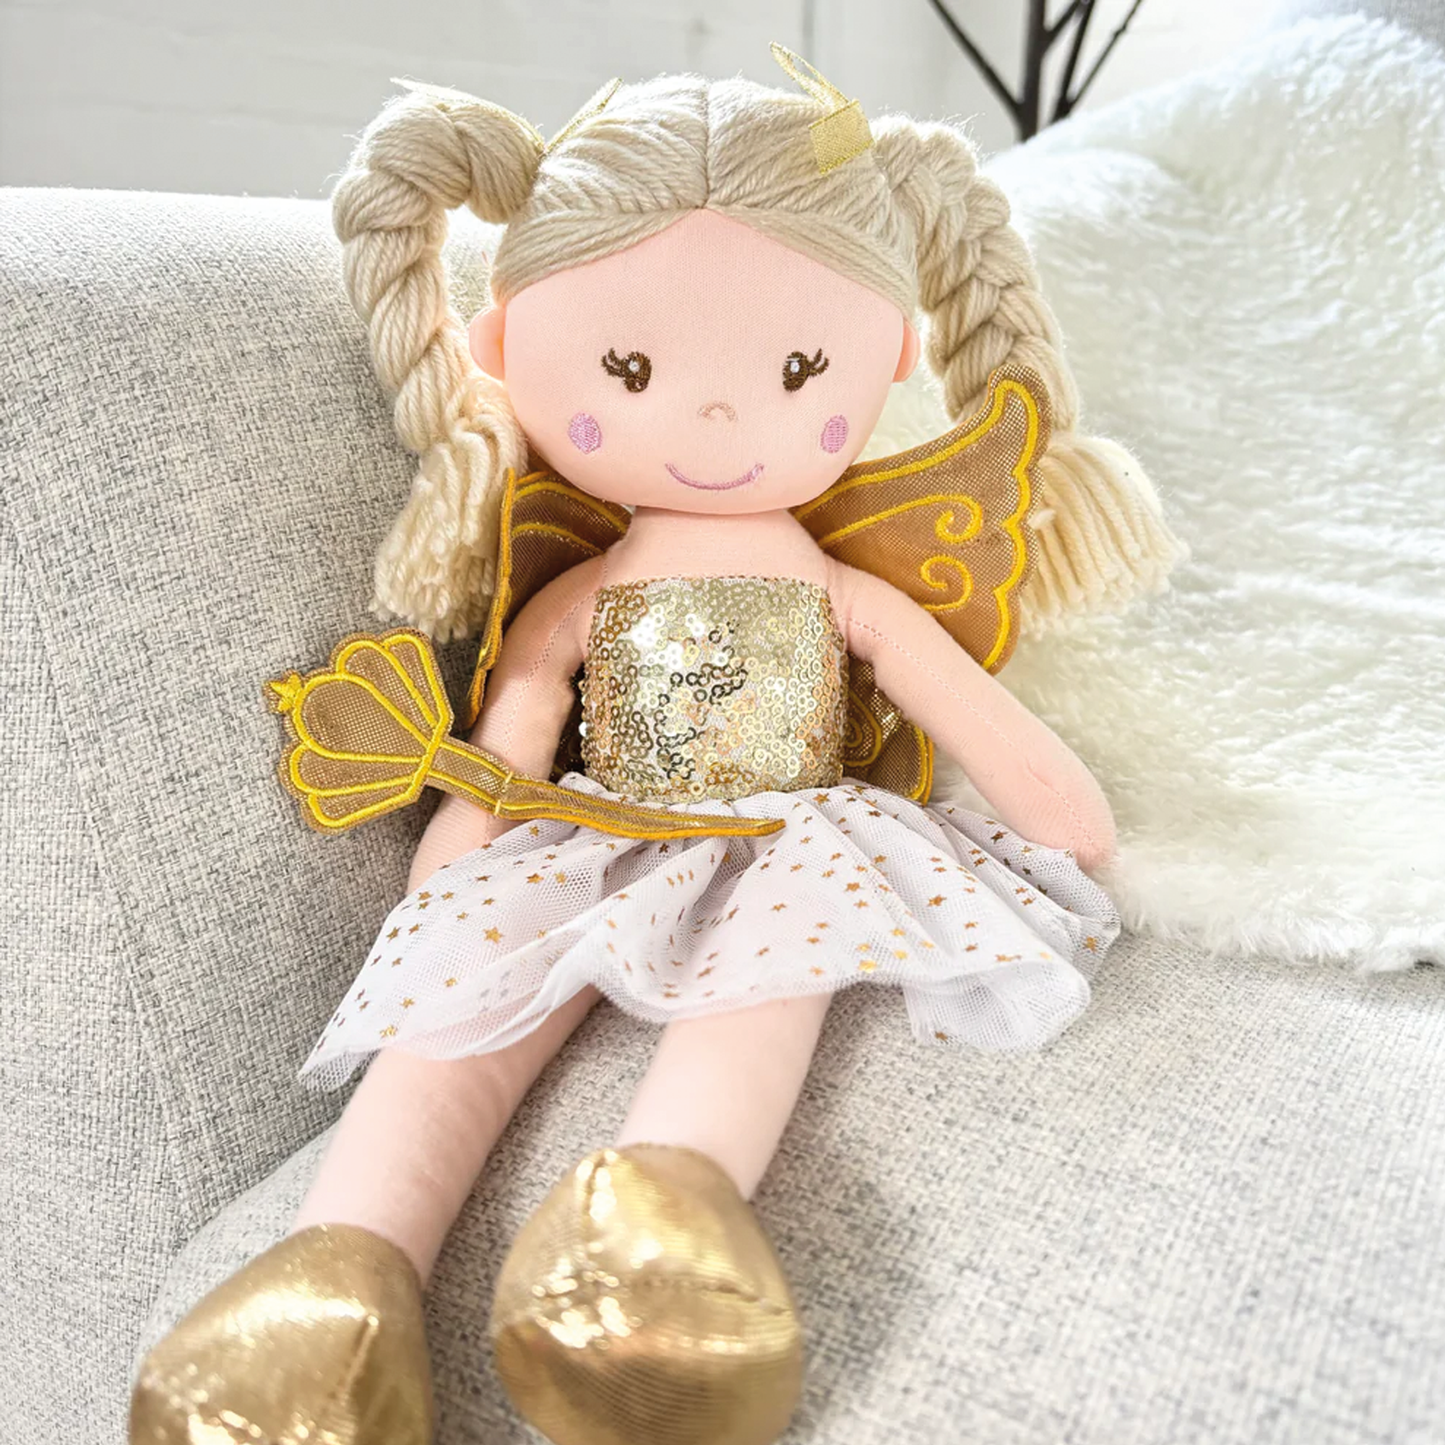 Personalised Fairy Doll Soft Plush Toy